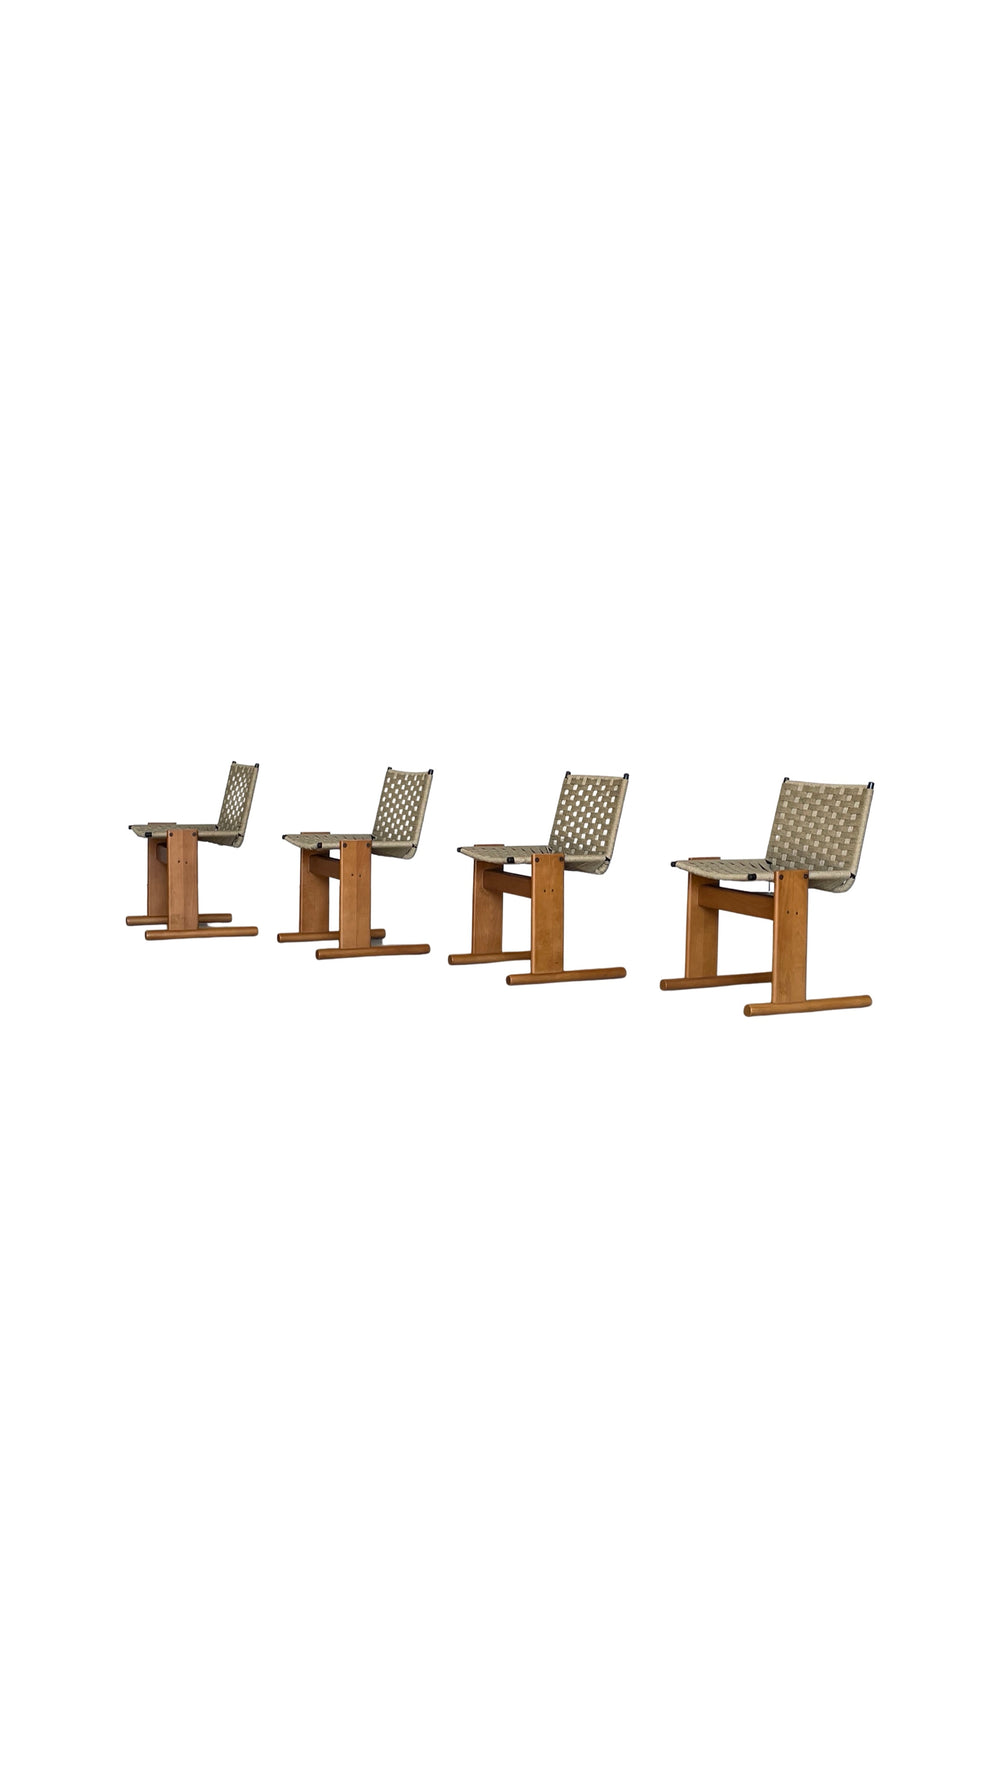 Afra Scarpa & Tobia Scarpa uncommon dining chairs for Molteni & C, Italy, 1970s